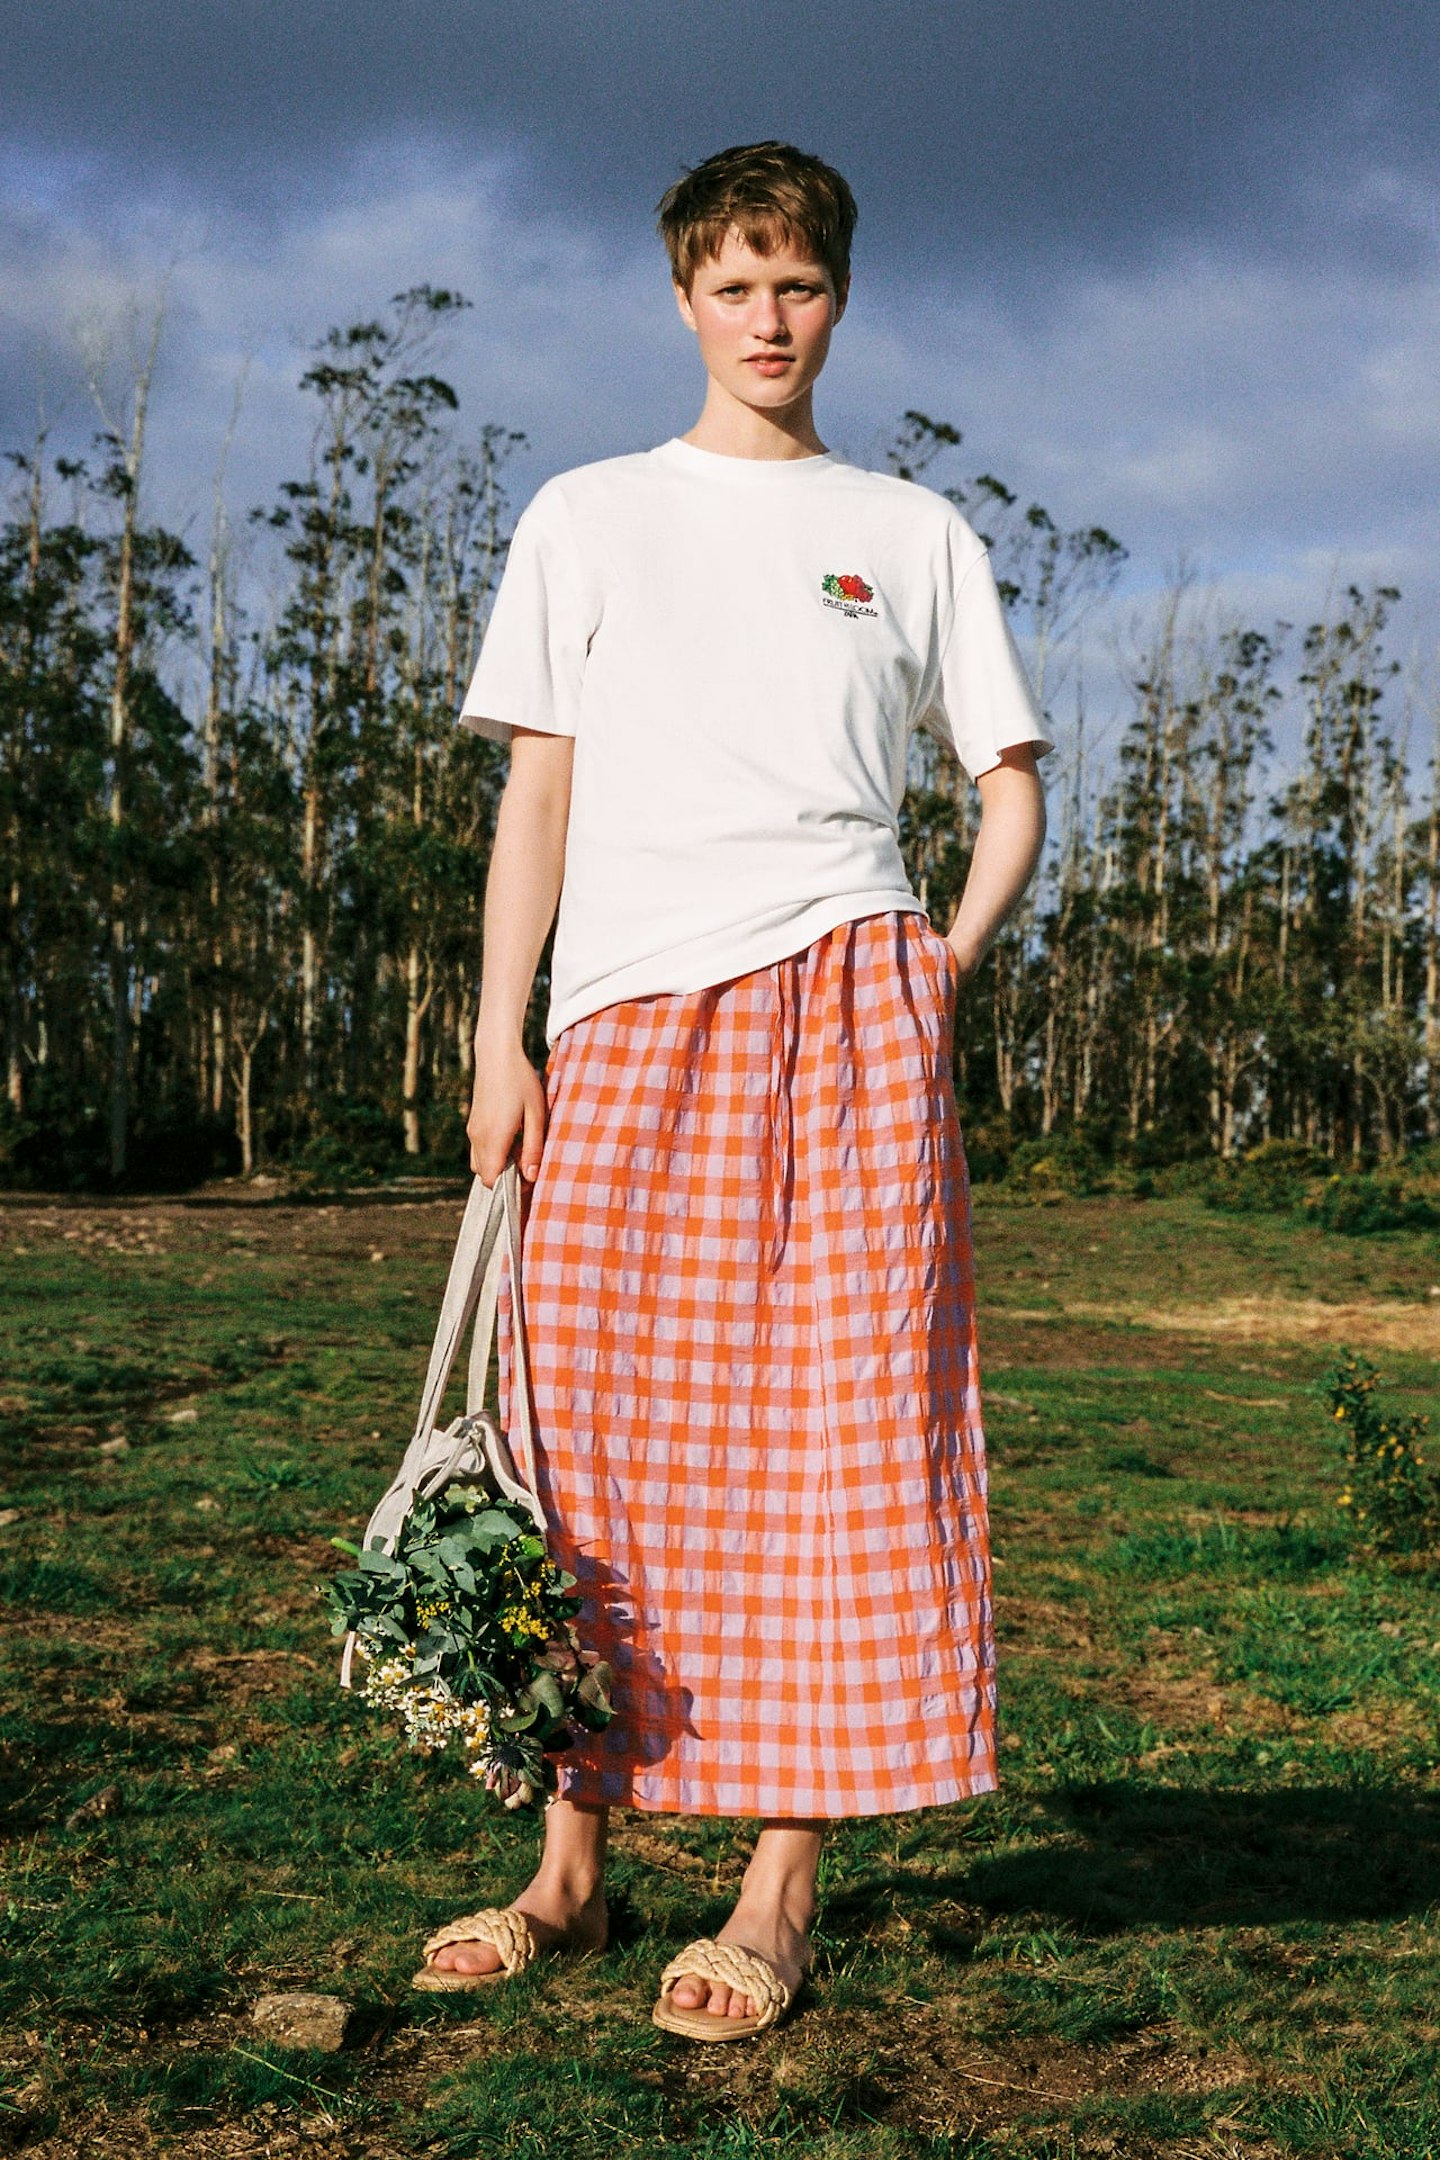 A model wearing a checked skirt and carrying a flower bag